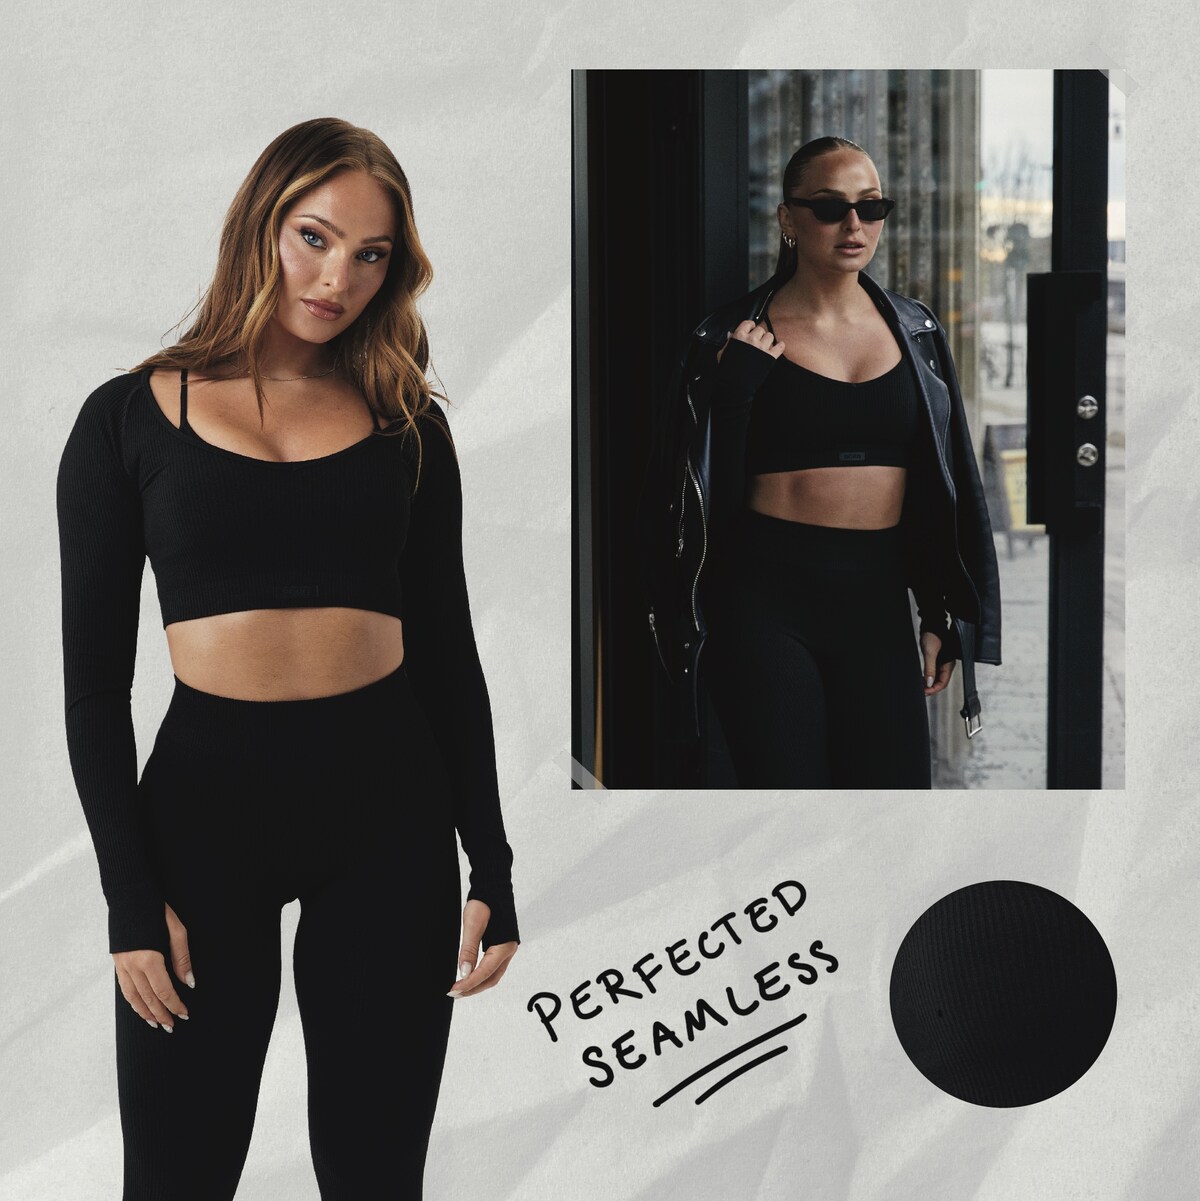 Movement capsule by Alice Stenlöf – Perfected seamless 💫 - Björn Borg